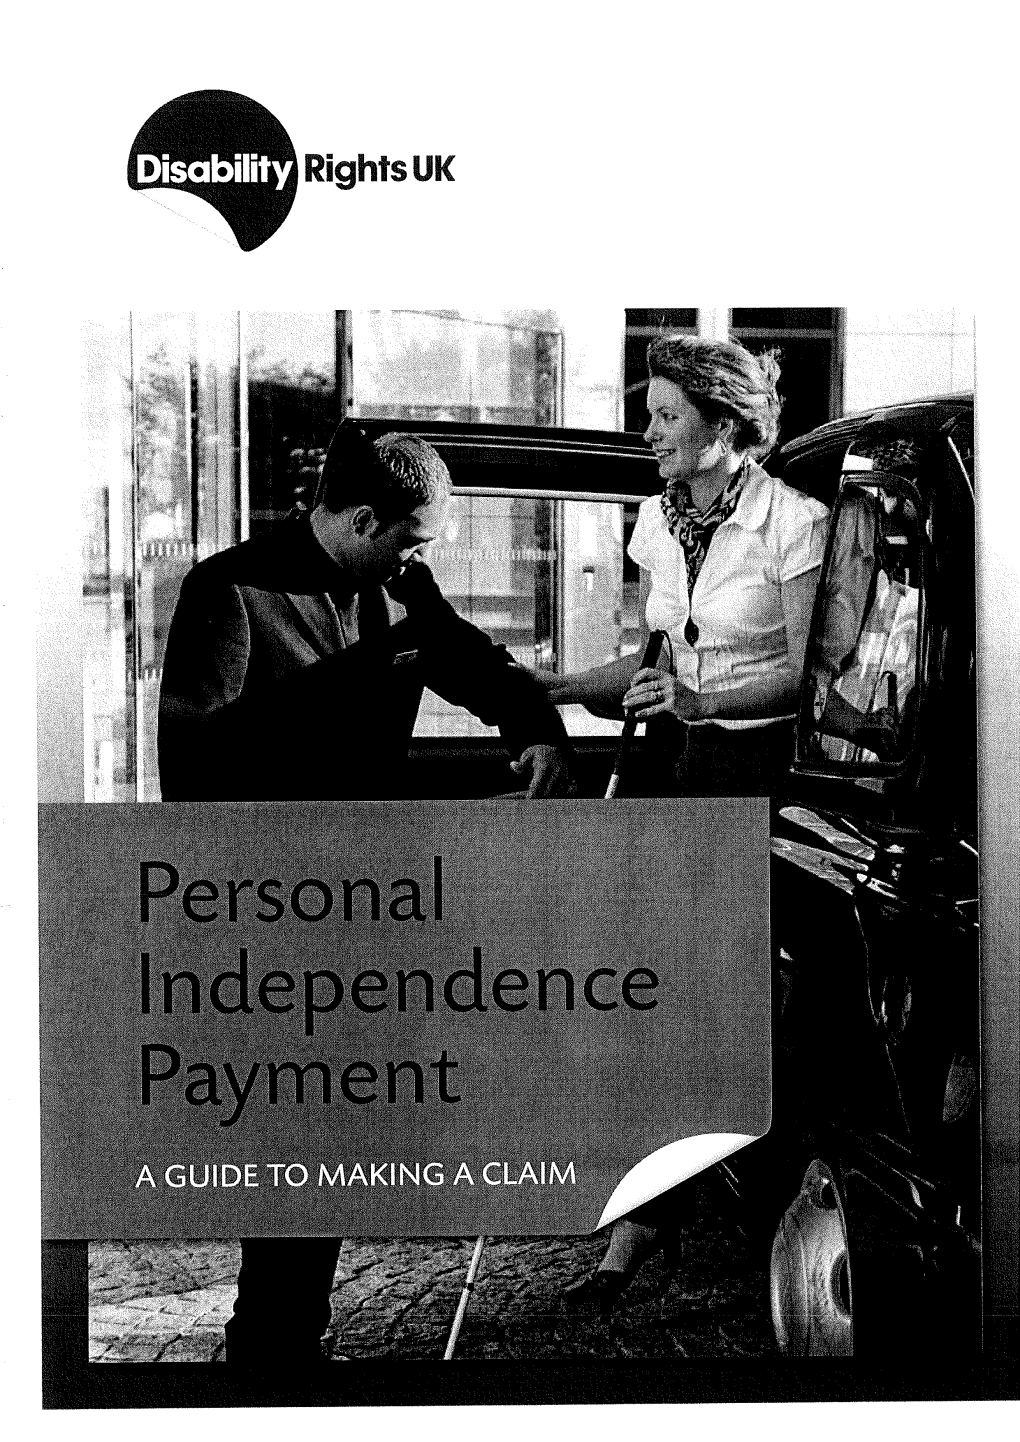 Disability Rights UK Use All Reasonable Endeavours to Ensure the Content of This Guide